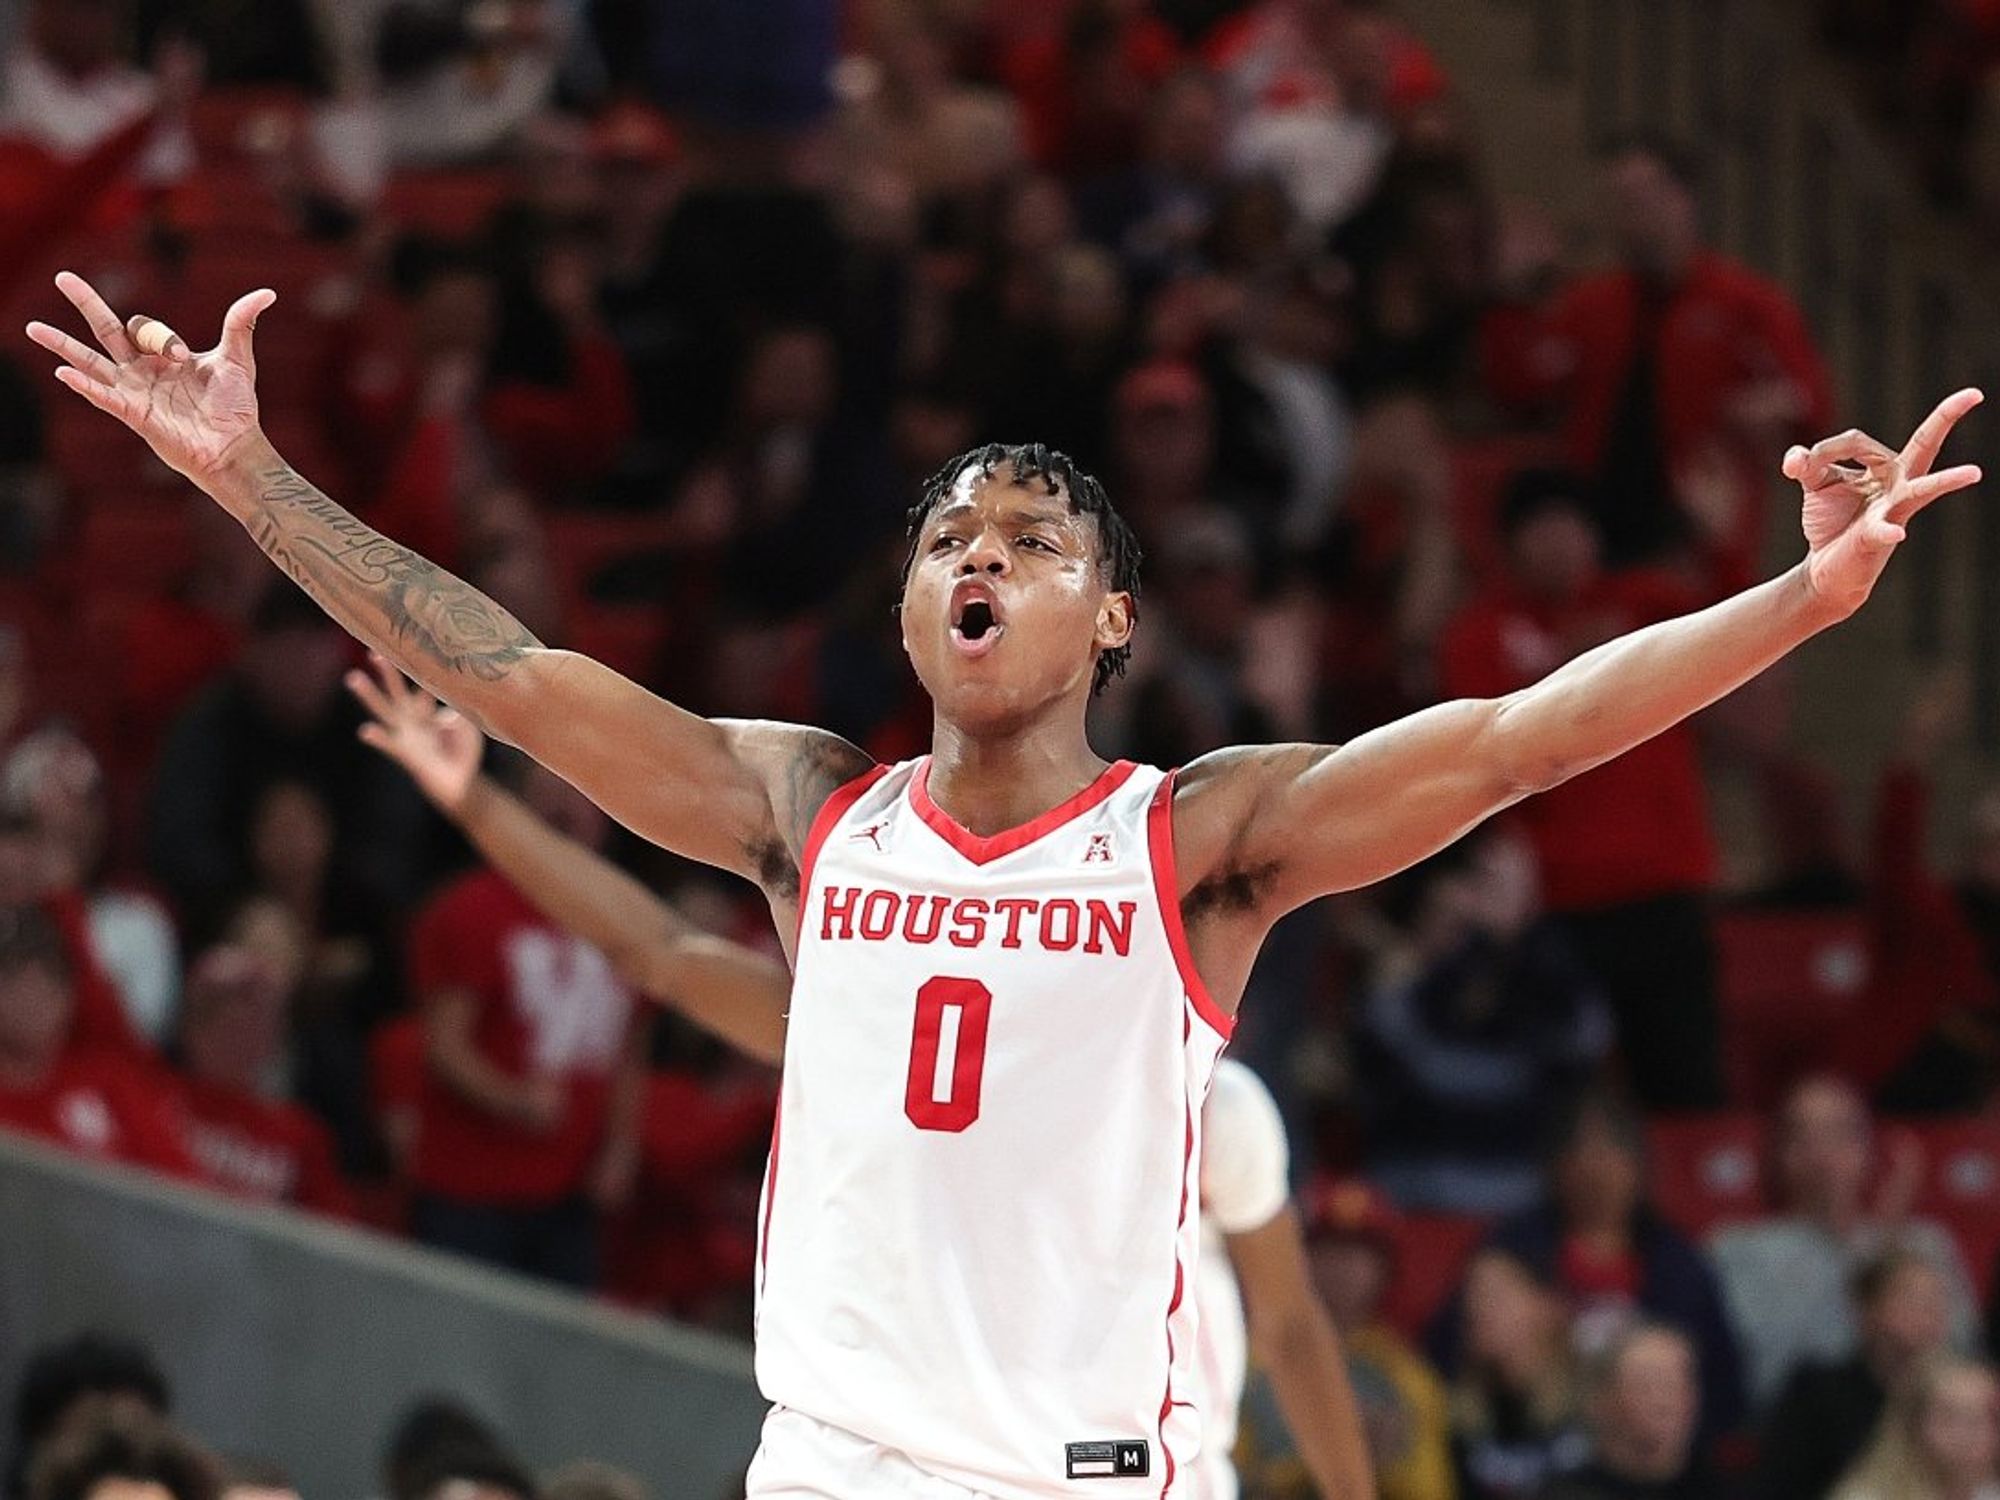 2022 Will Be A Year Of Cementing The Houston Rockets' Future